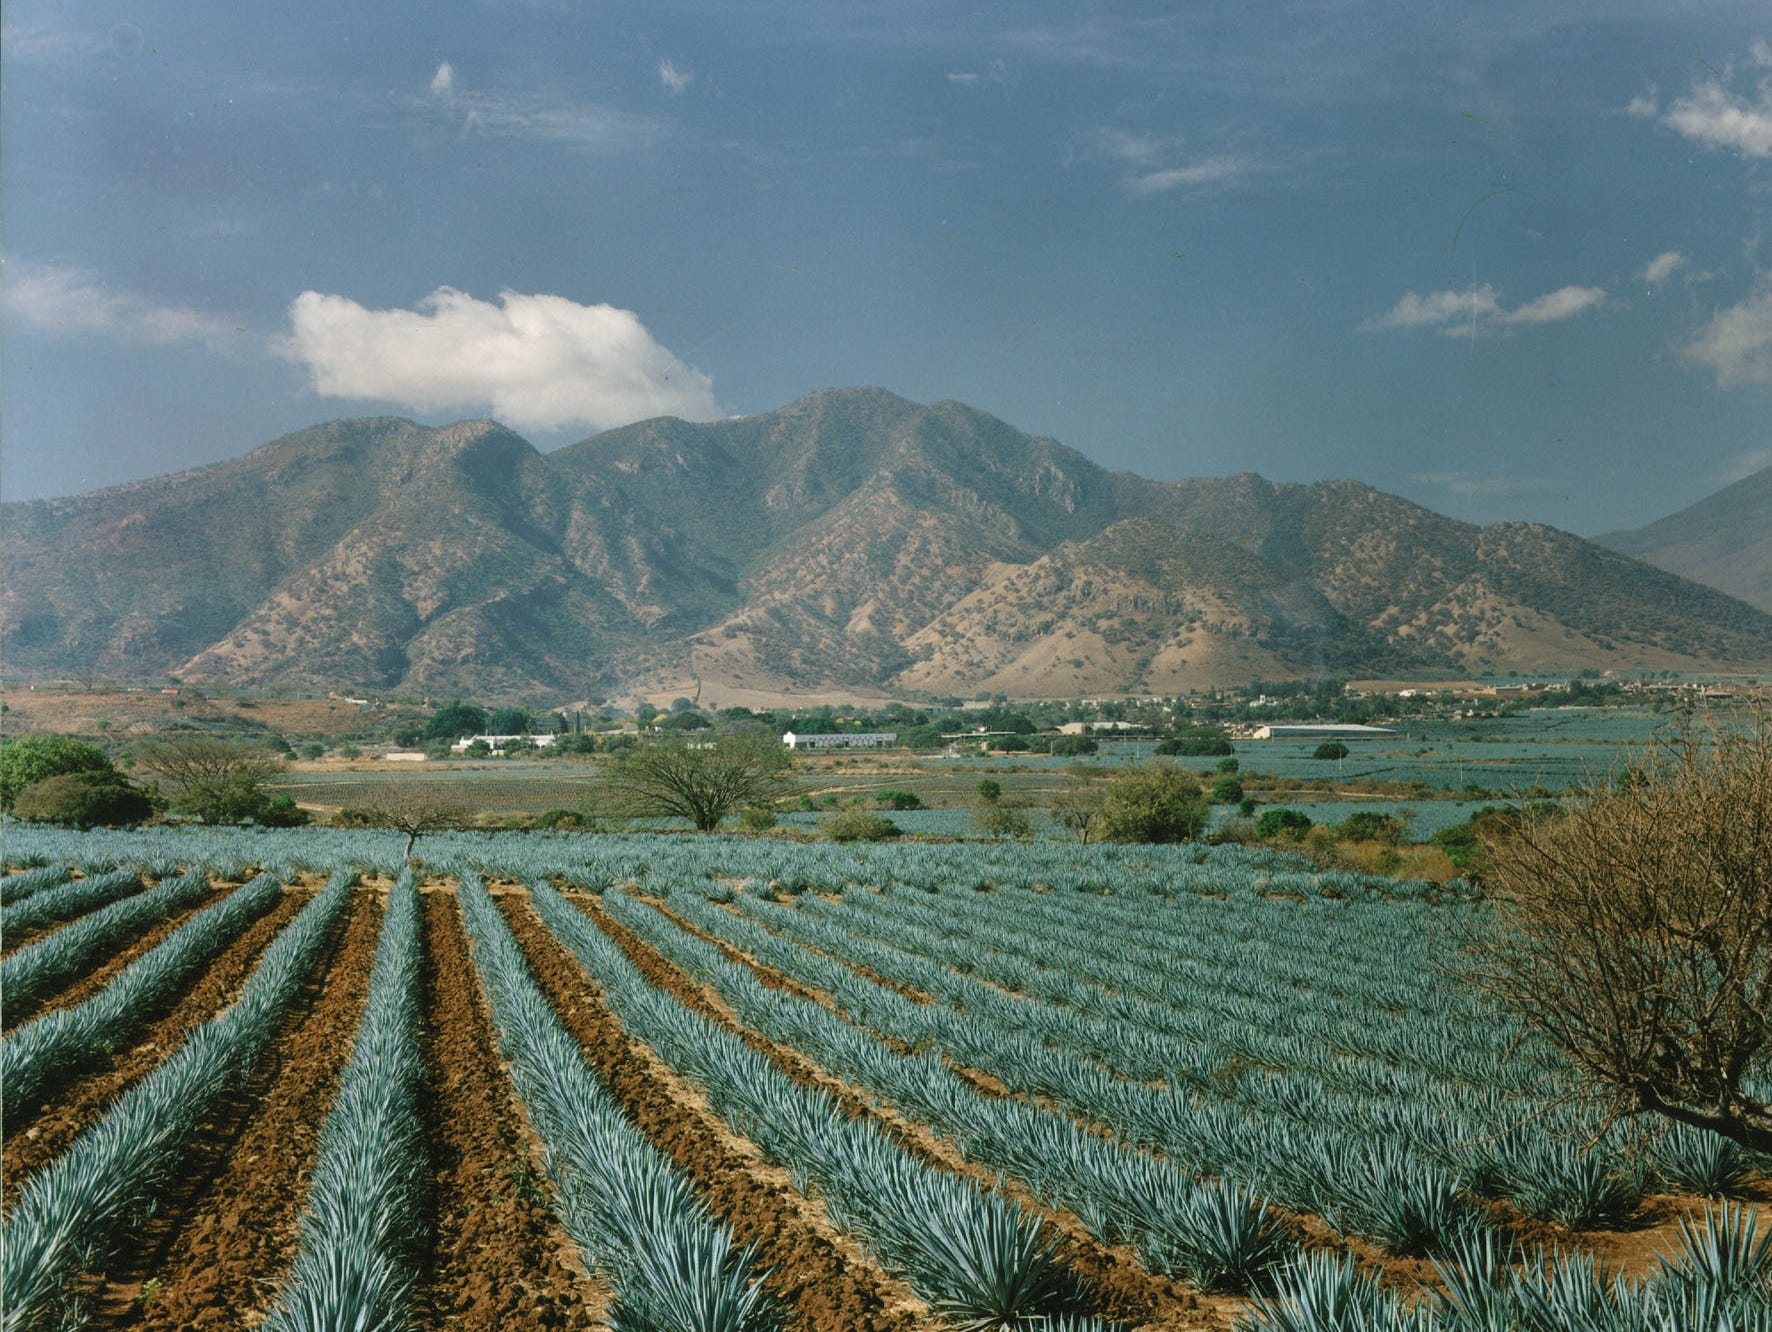 Visiting the home of tequila is an authentic and educational experience that encompasses the culture, farming and culinary arts of this diverse area of the country.